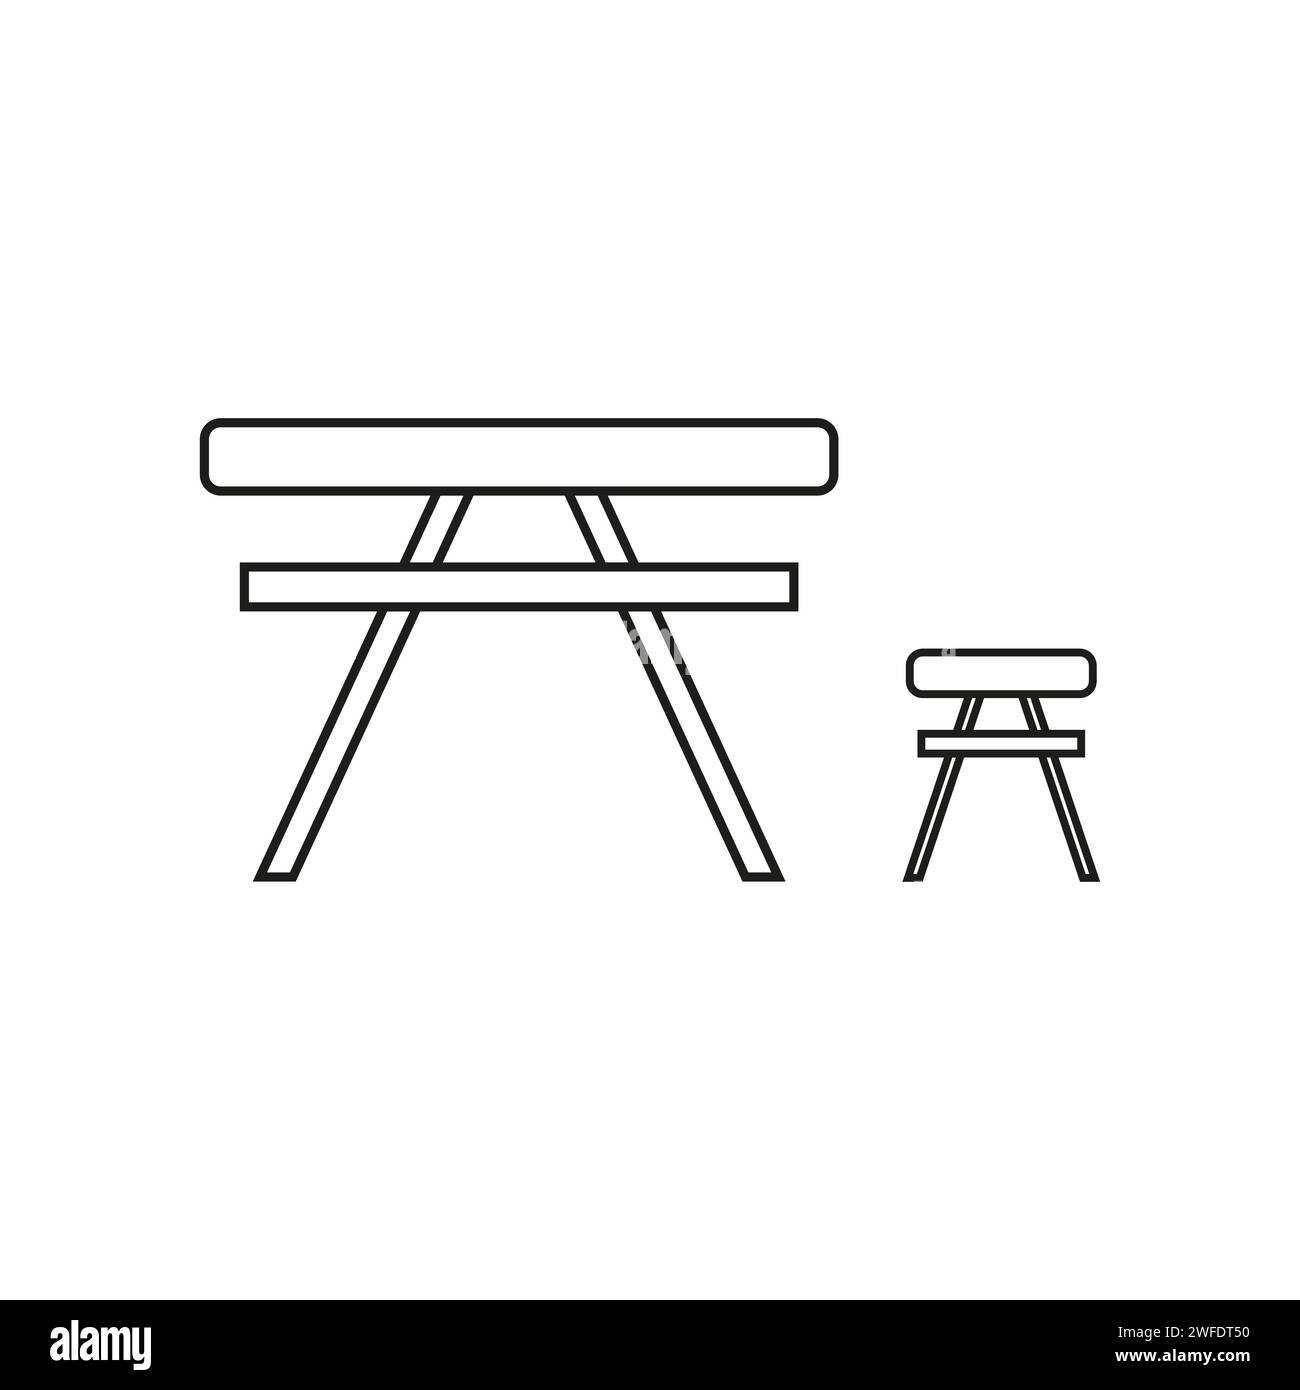 Picnic table icon. Vector illustration. EPS 10. Stock image. Stock Vector